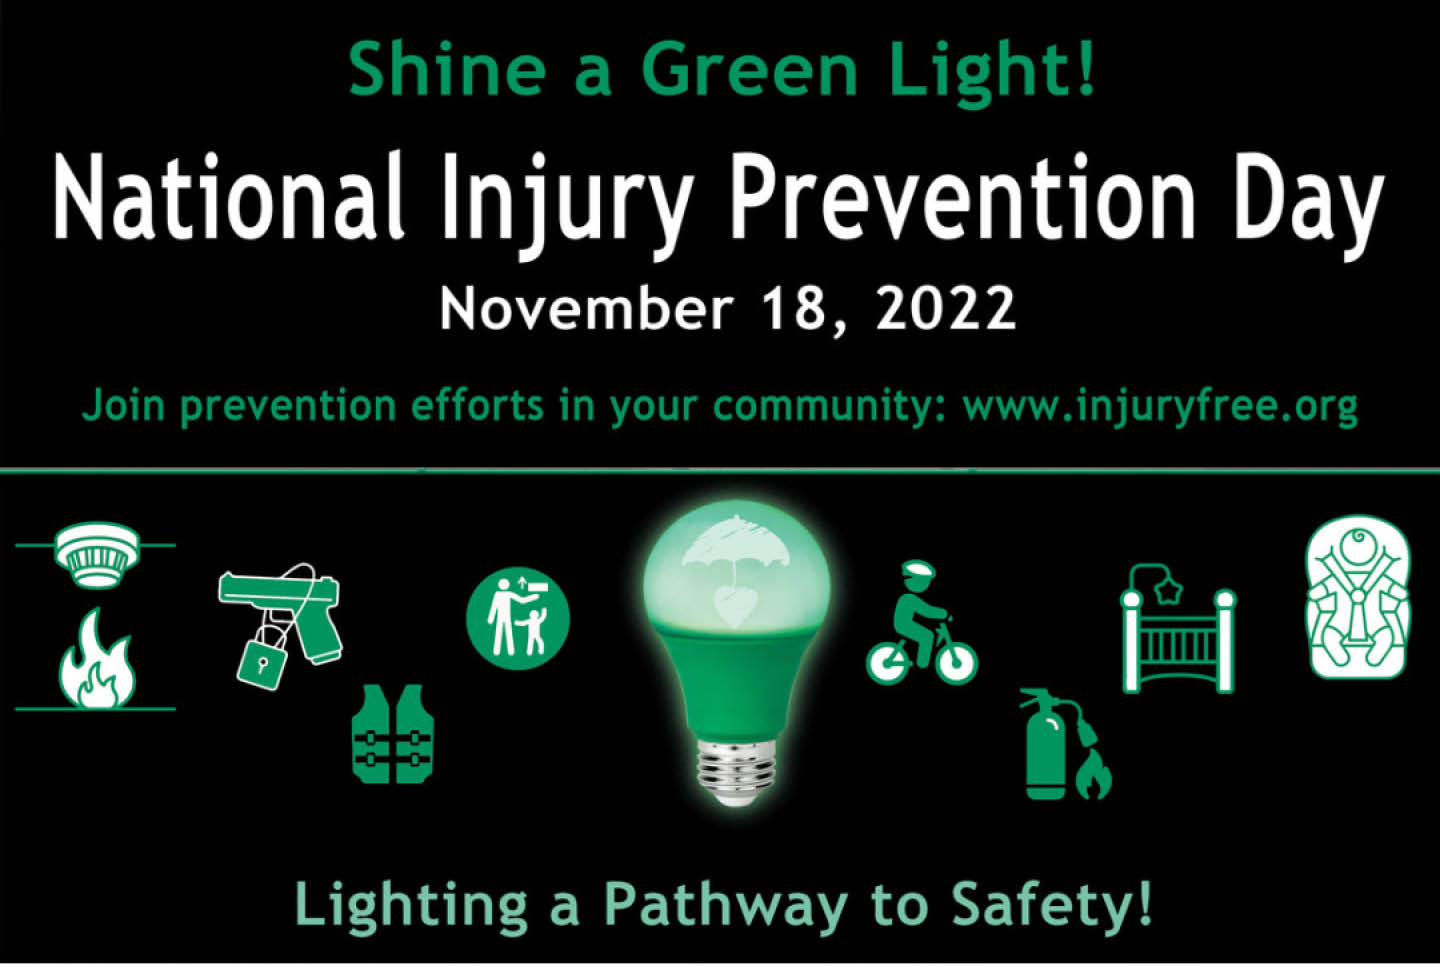 Shine a Green Light on National Injury Prevention Day 2022. Lighting a Pathway to Safety.